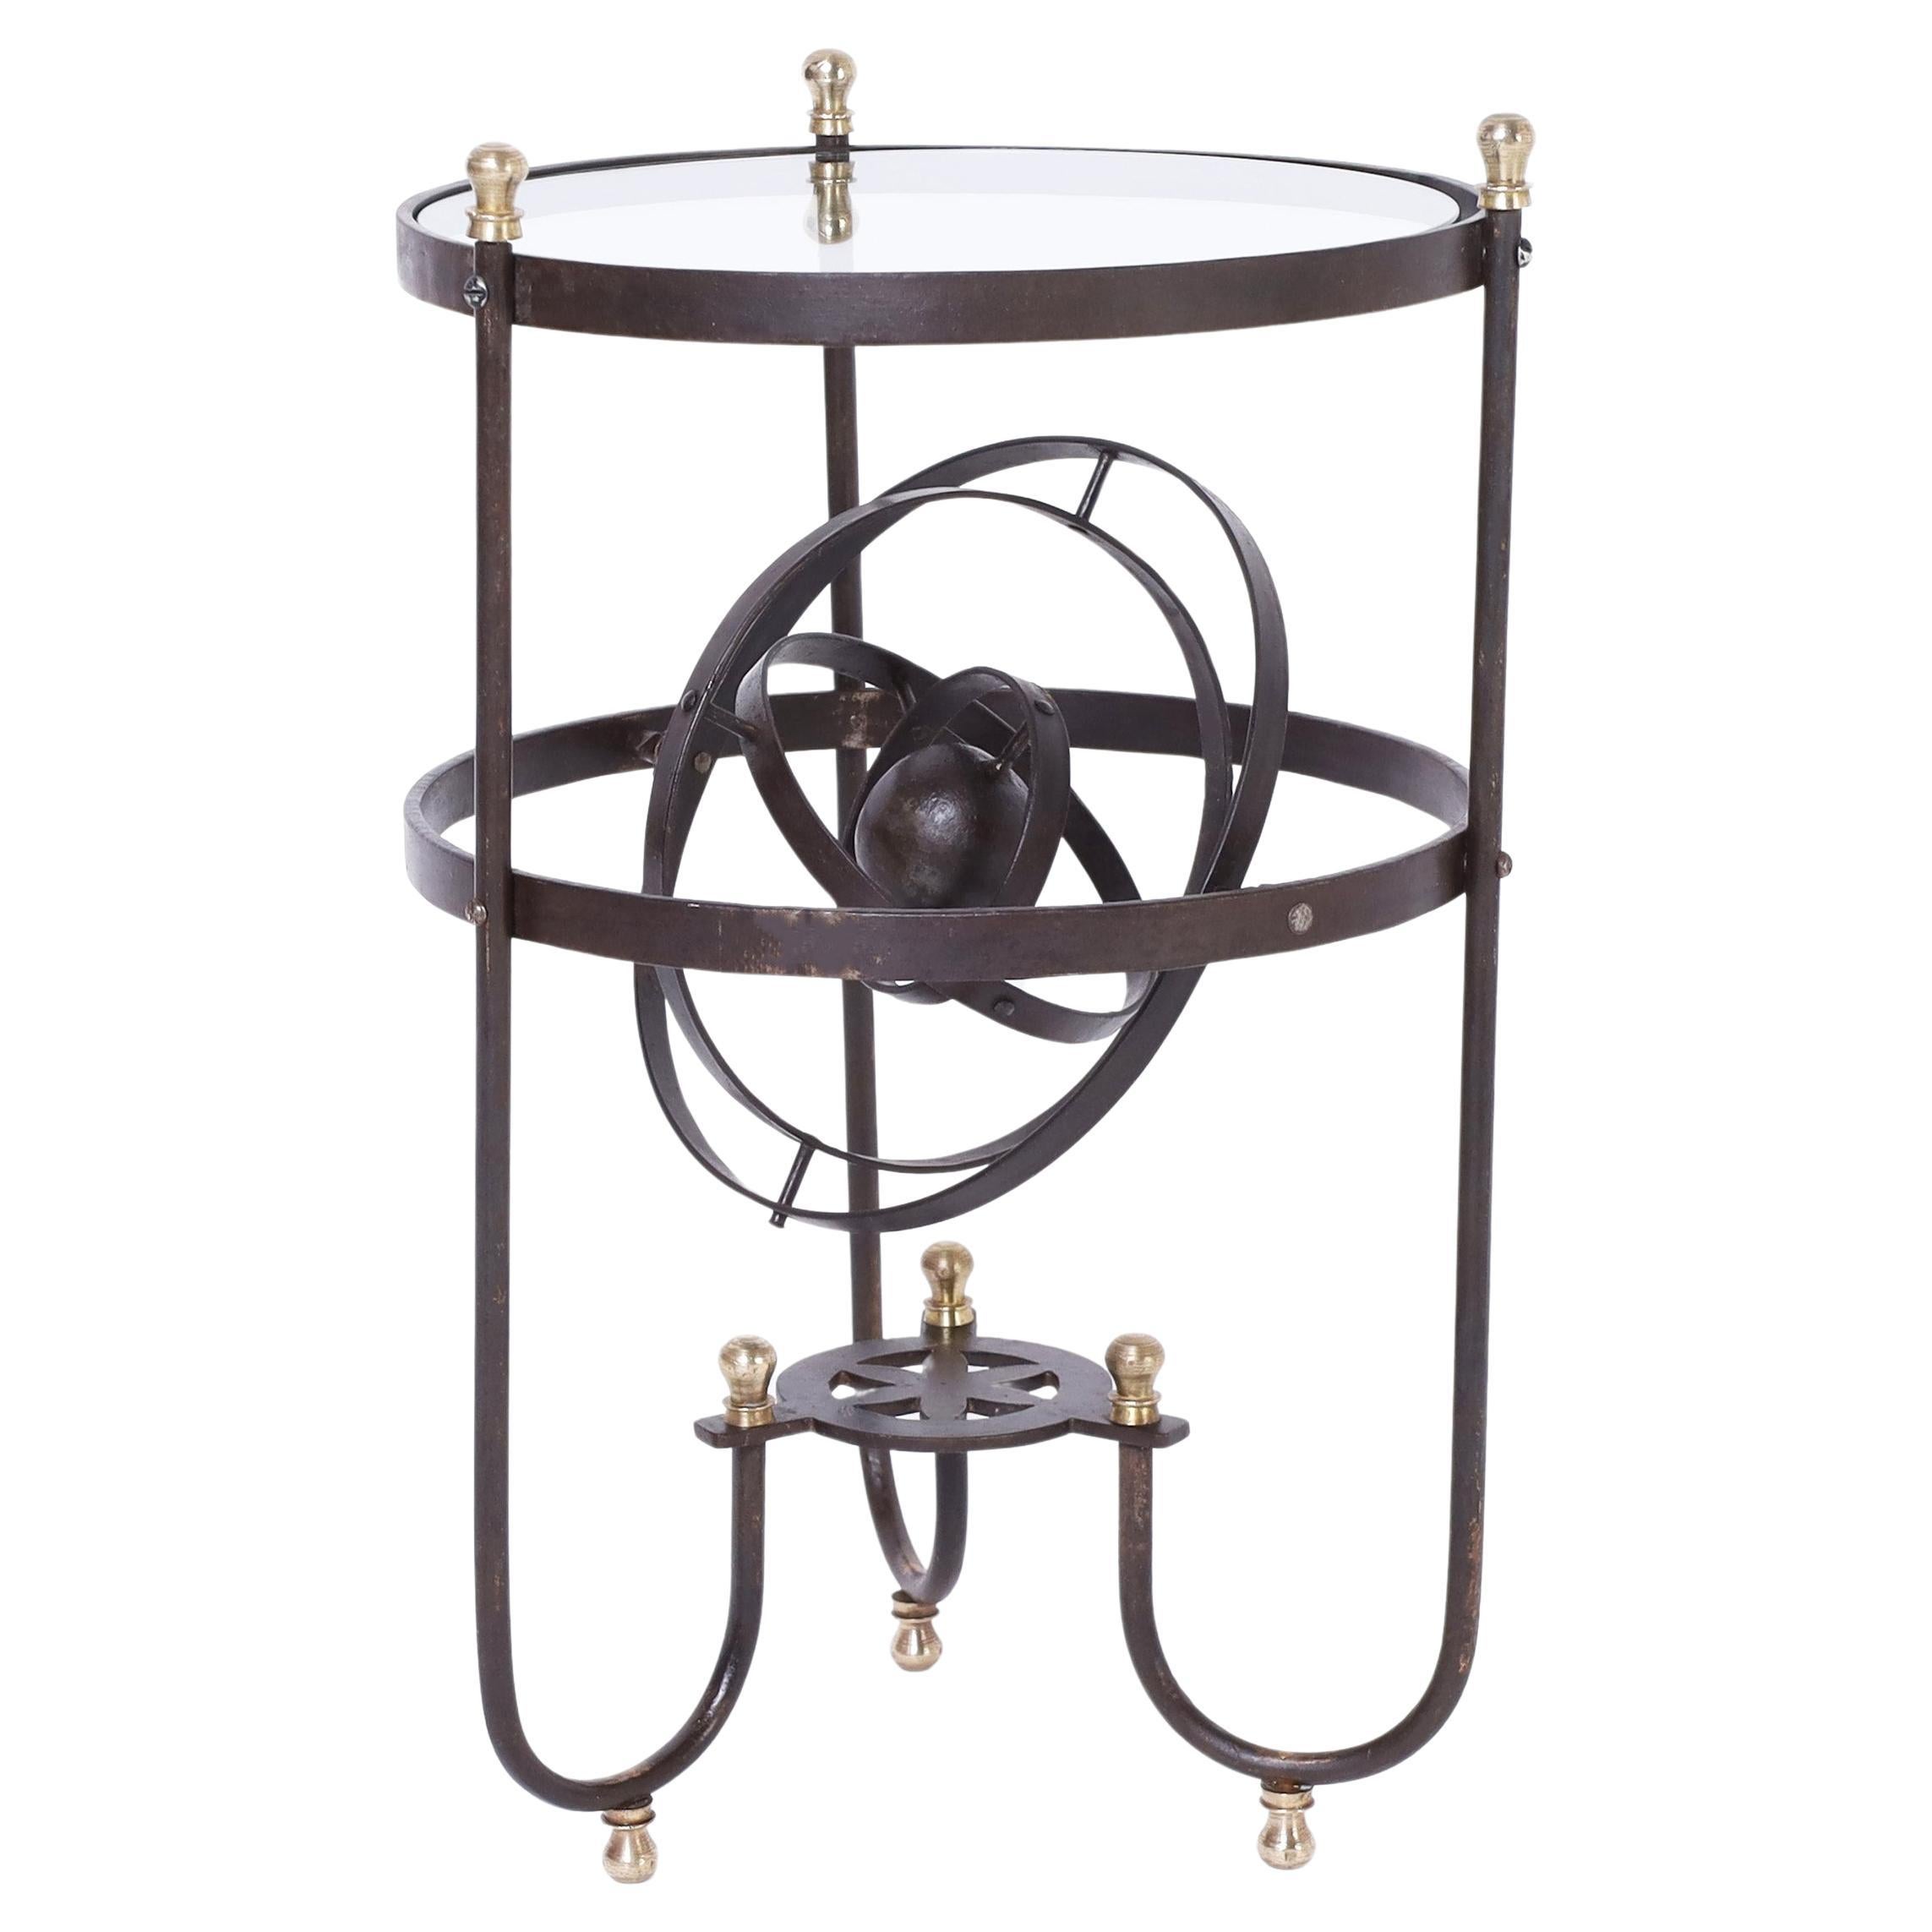  Vintage Iron Stand with Armillary Sphere For Sale